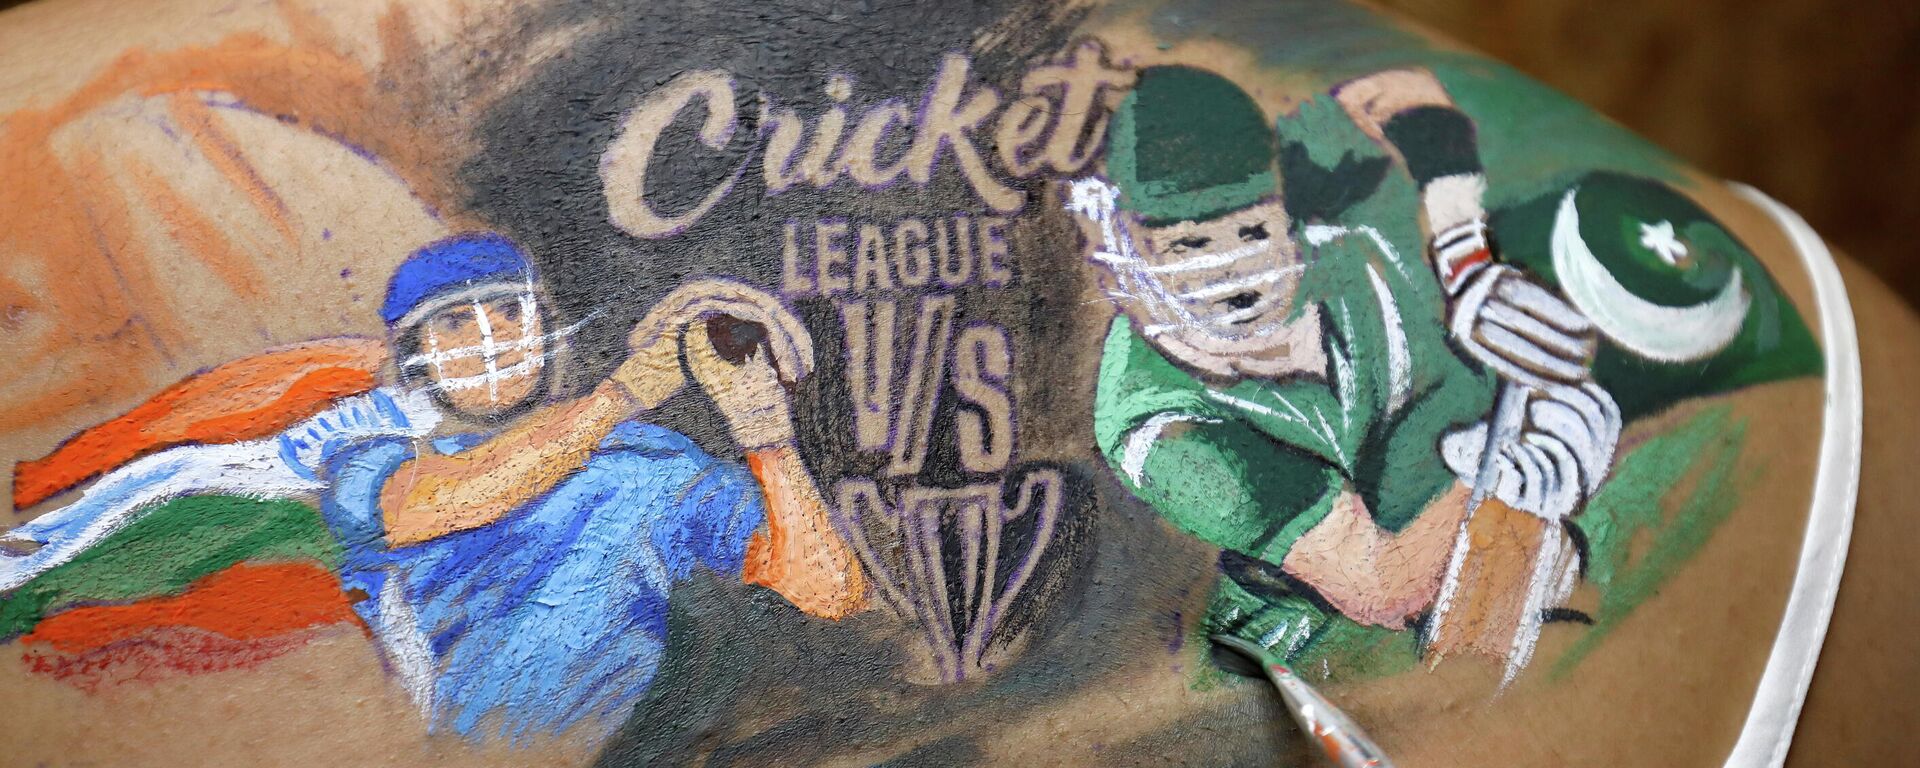 A cricket fan gets her back painted before the start of the first match between India and Pakistan in Twenty20 World Cup Super 12 stage in Dubai, in Ahmedabad, India, October 24, 2021 - Sputnik International, 1920, 26.10.2021